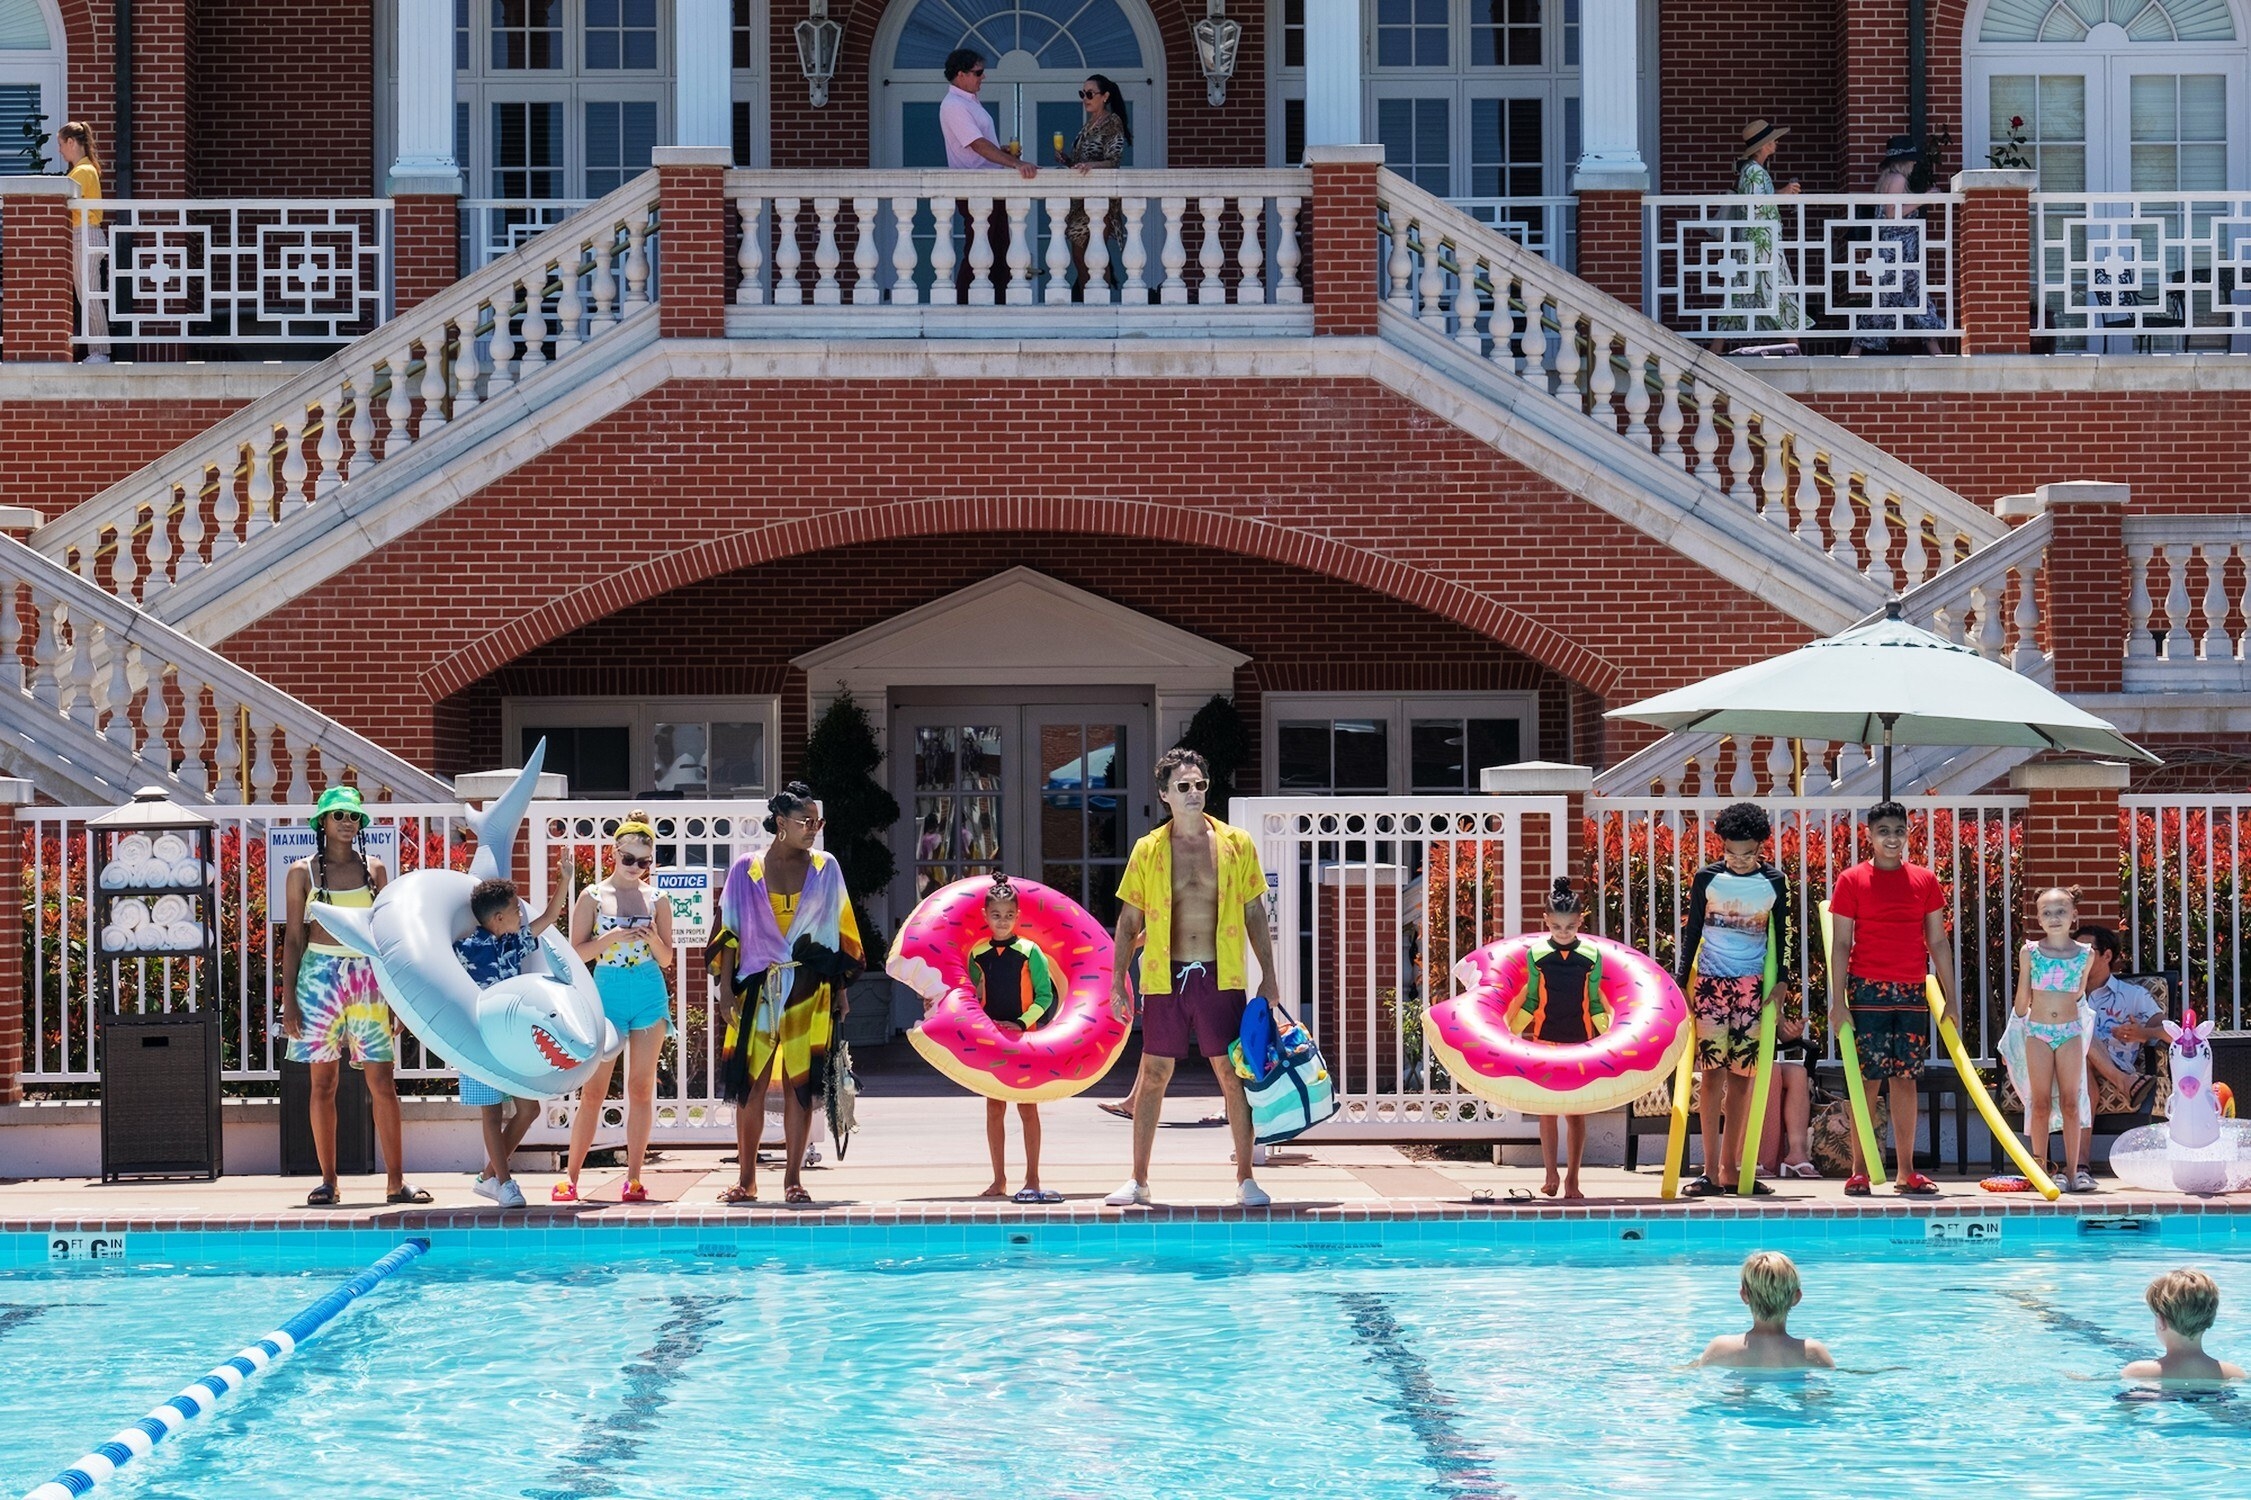 A group of adults (Gabrielle Union and Zach Braff) and children stand by the side of a pool holding different floaties